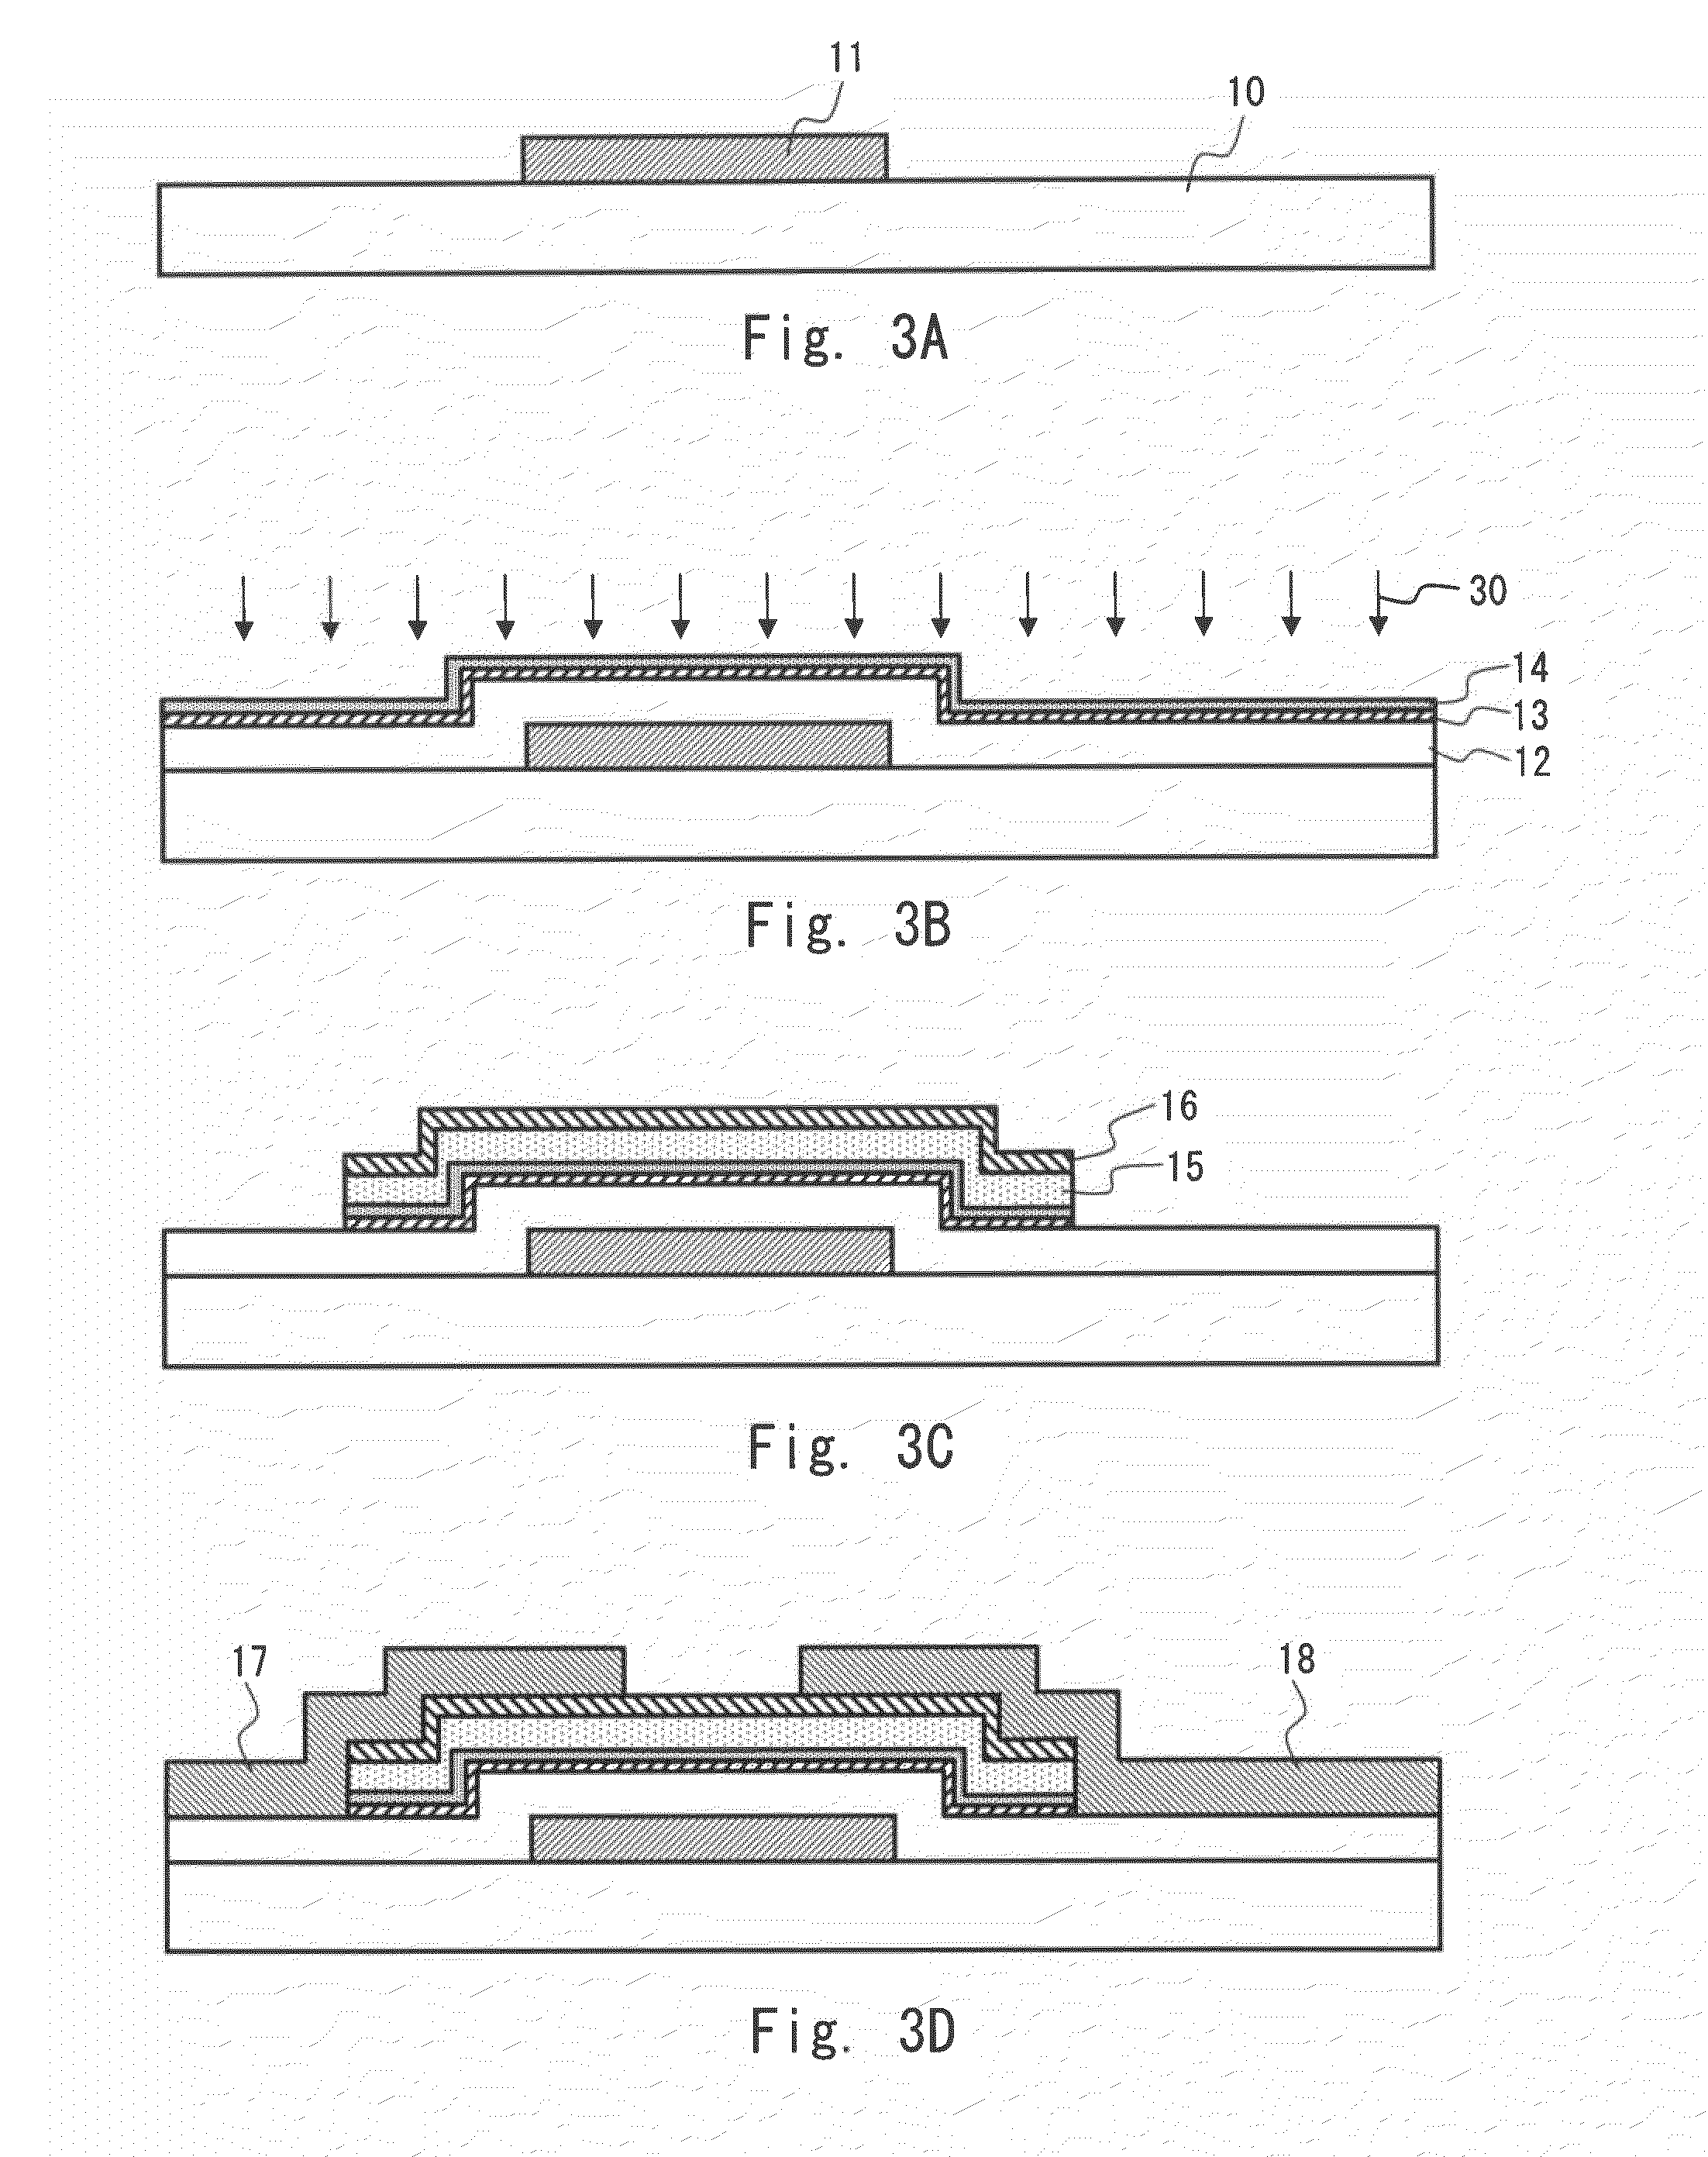 Back-channel-etch type thin-film transistor, semiconductor device and manufacturing methods thereof